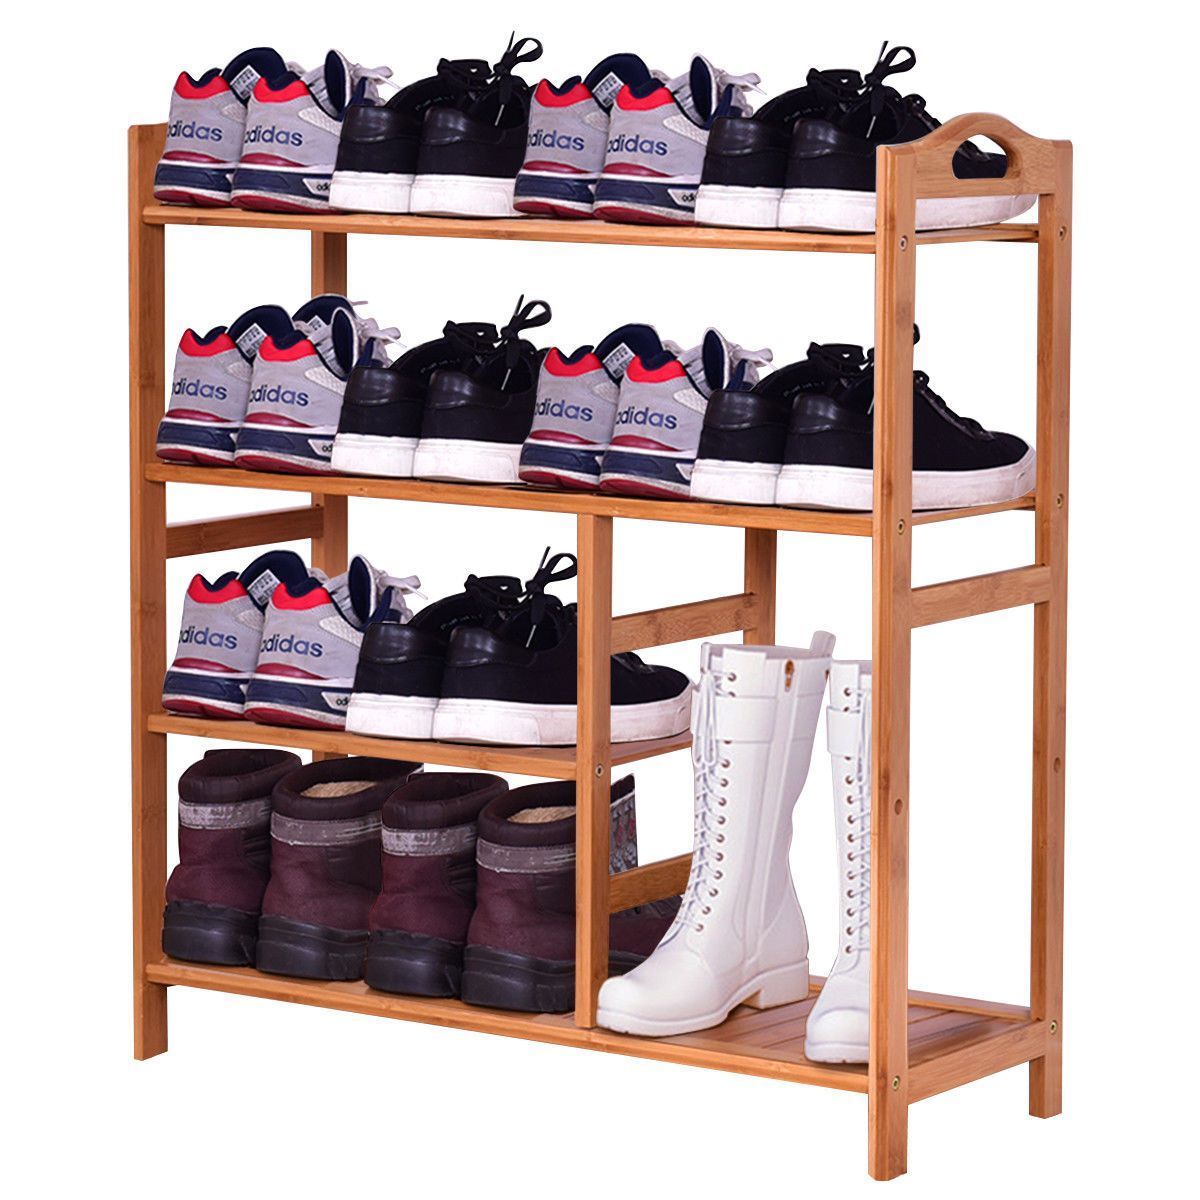 4 Tier Multifunction Bamboo Shoe Rack Boot Tower Shelf Modern Home Shoes Storage Organizer Stand